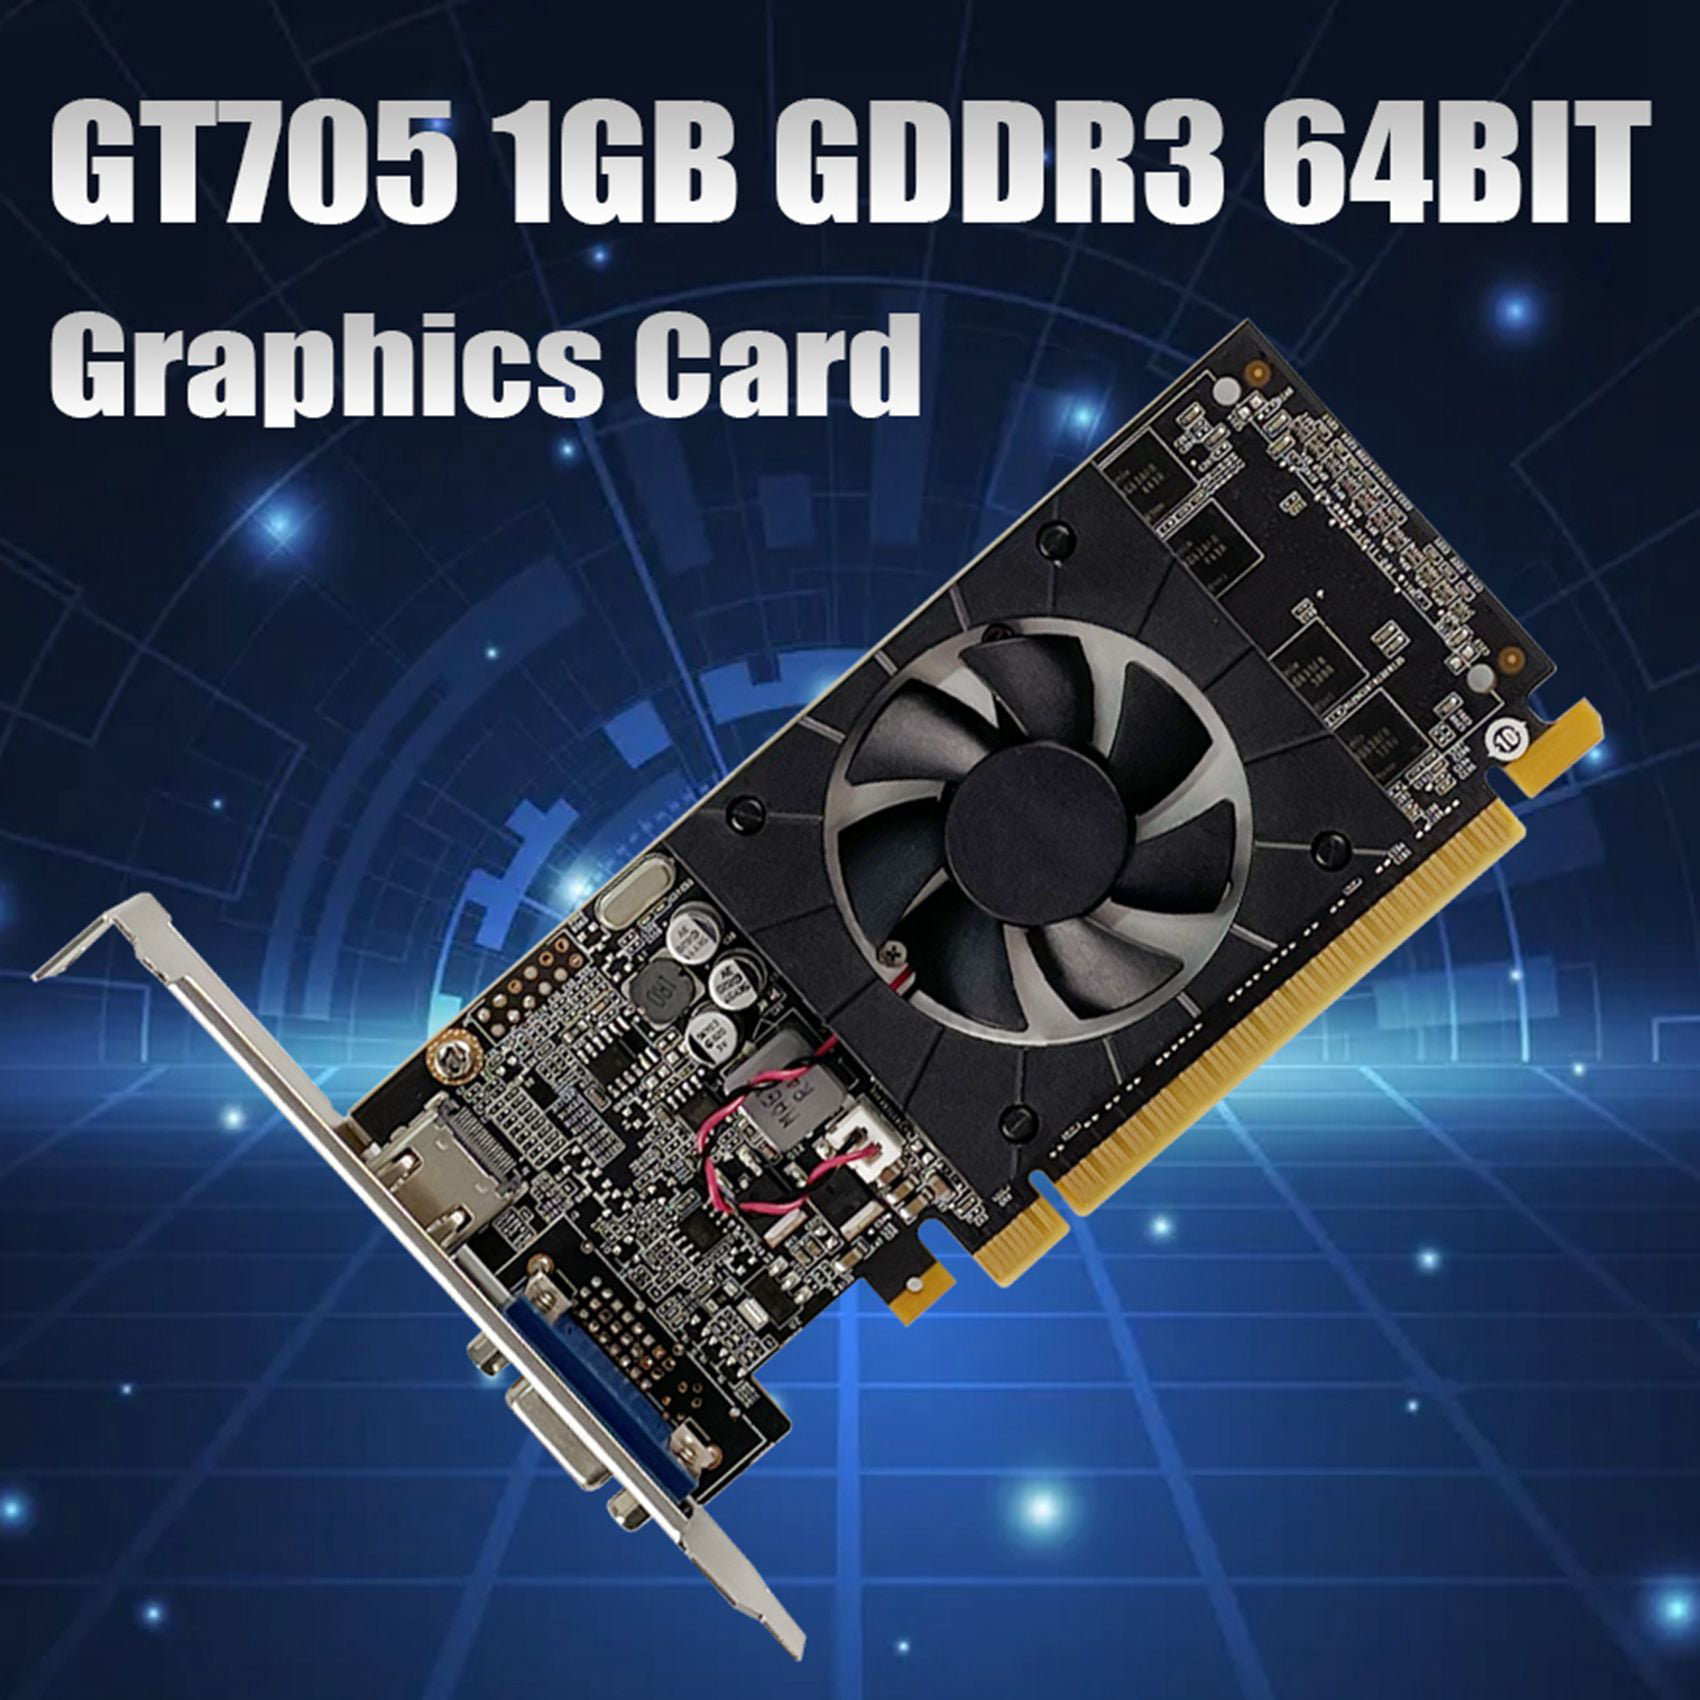 GT705 Card 1GB GDDR3 64BIT 810MHz PCIE 2.0 HDMI-Compatible VGA Video Card for ASUS Colorful Motherboard - Walmart.com